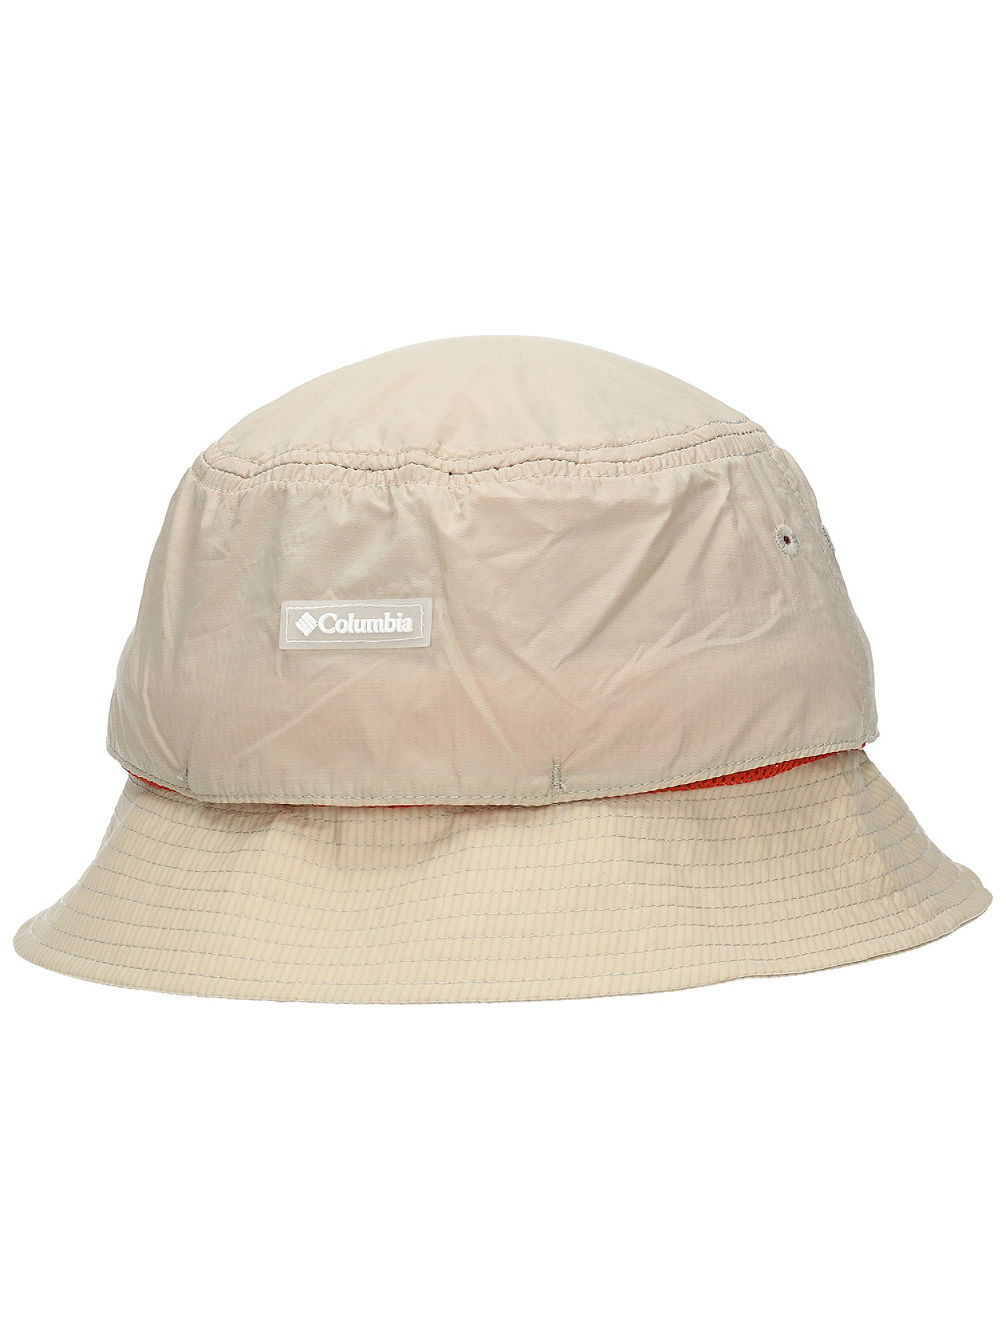 Punchbowl Vented Bucket Hat